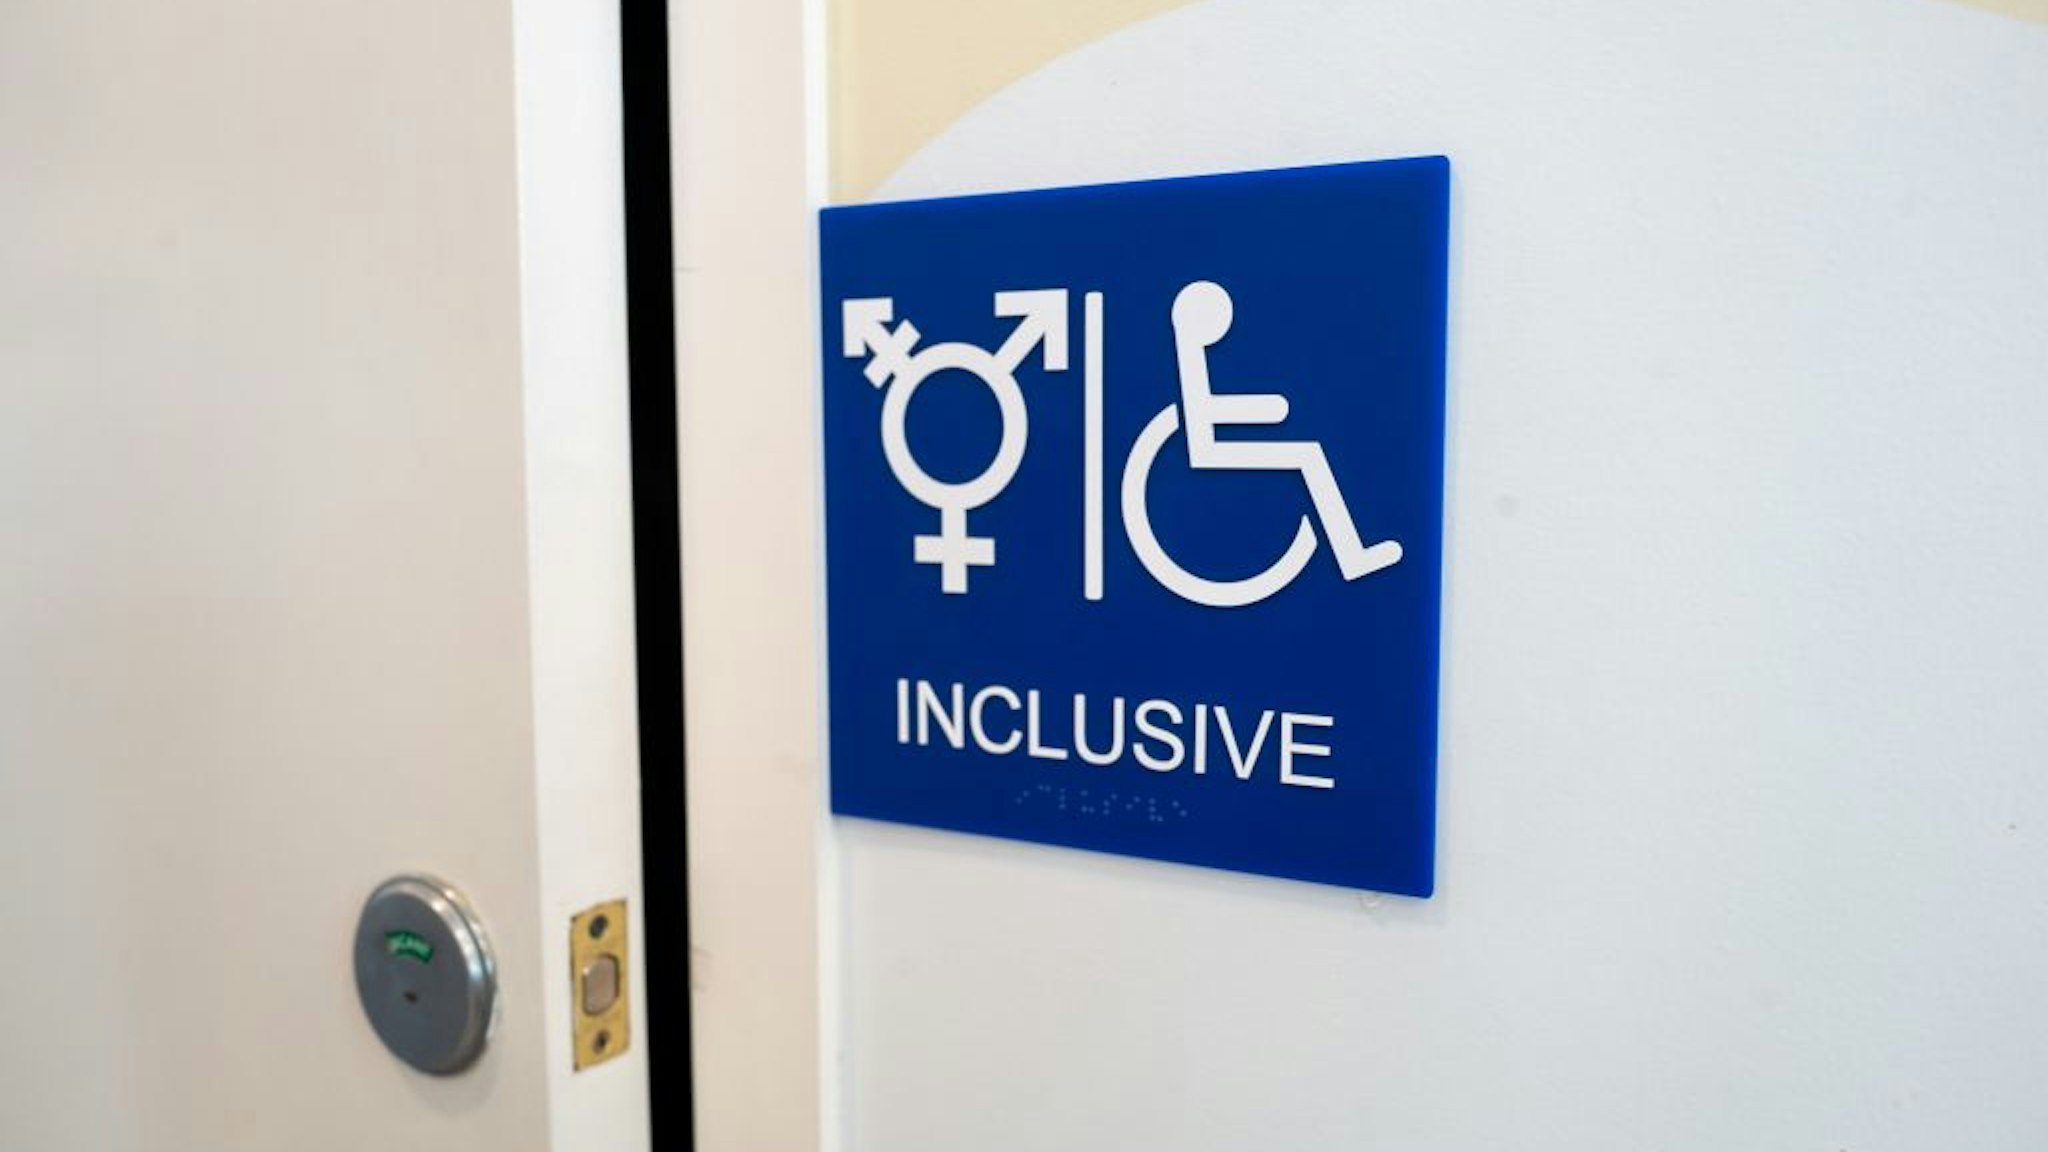 Sign for inclusive restroom, with symbol indicating male, female and transgender as well as handicapped symbol, part of LGBT rights initiatives in the Mission District neighborhood of San Francisco, California, July 18, 2019. (Photo by Smith Collection/Gado/Getty Images)